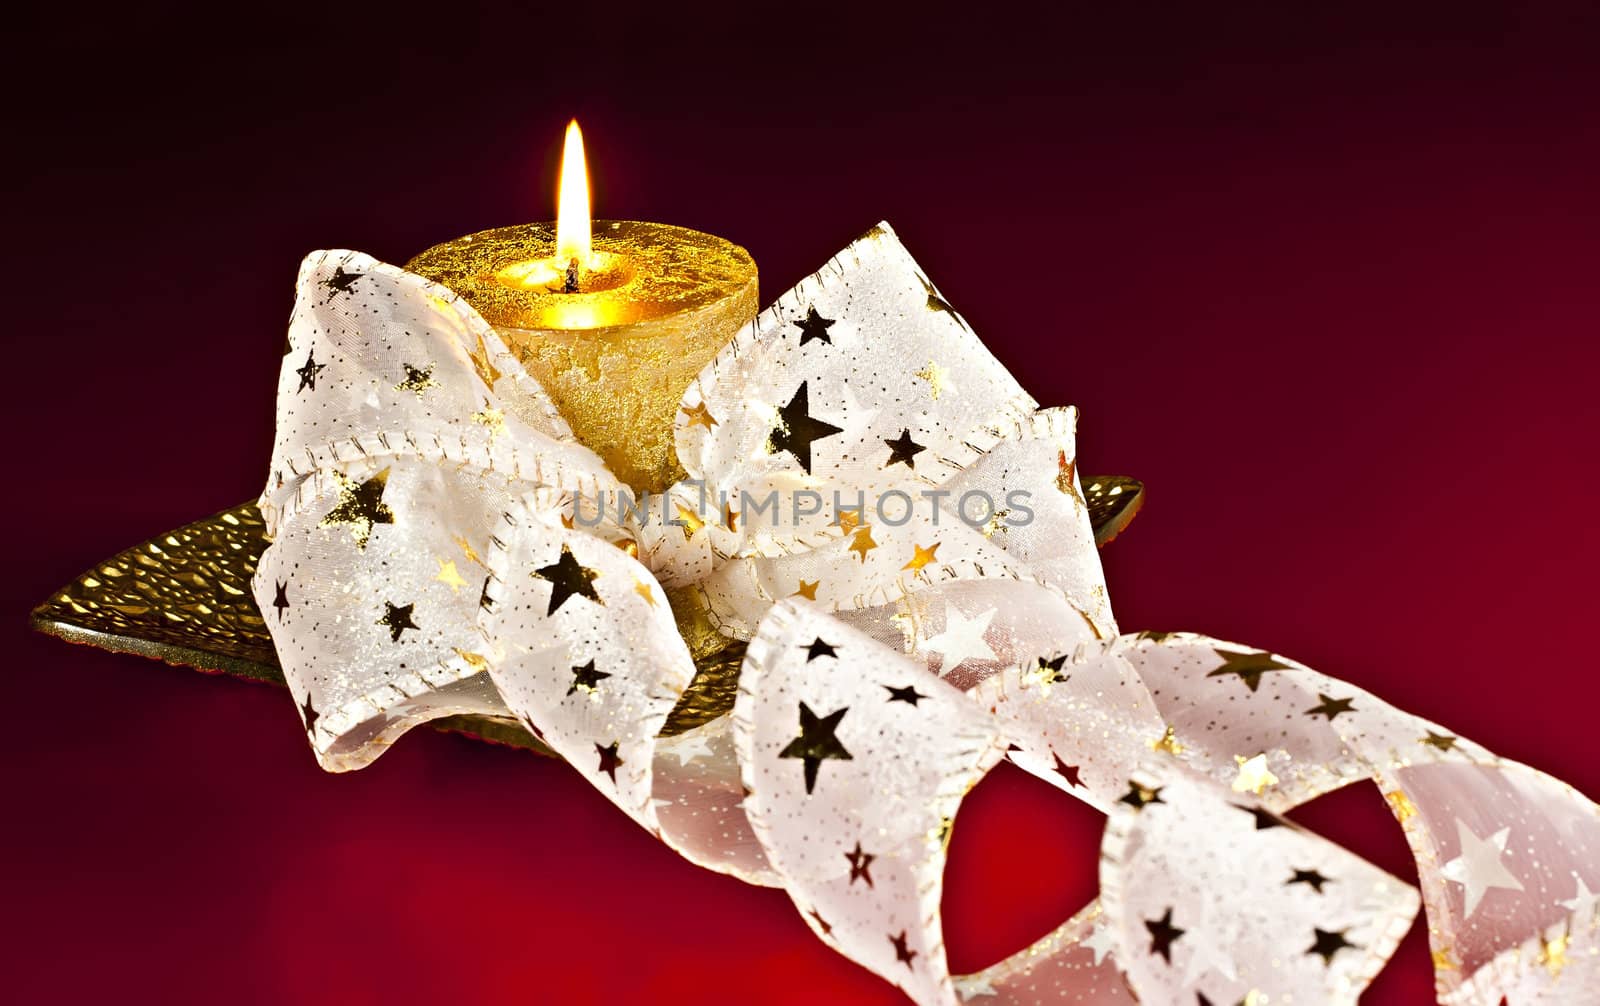 Christmas Decor, a burning candle gift with Bantu on a red background.
